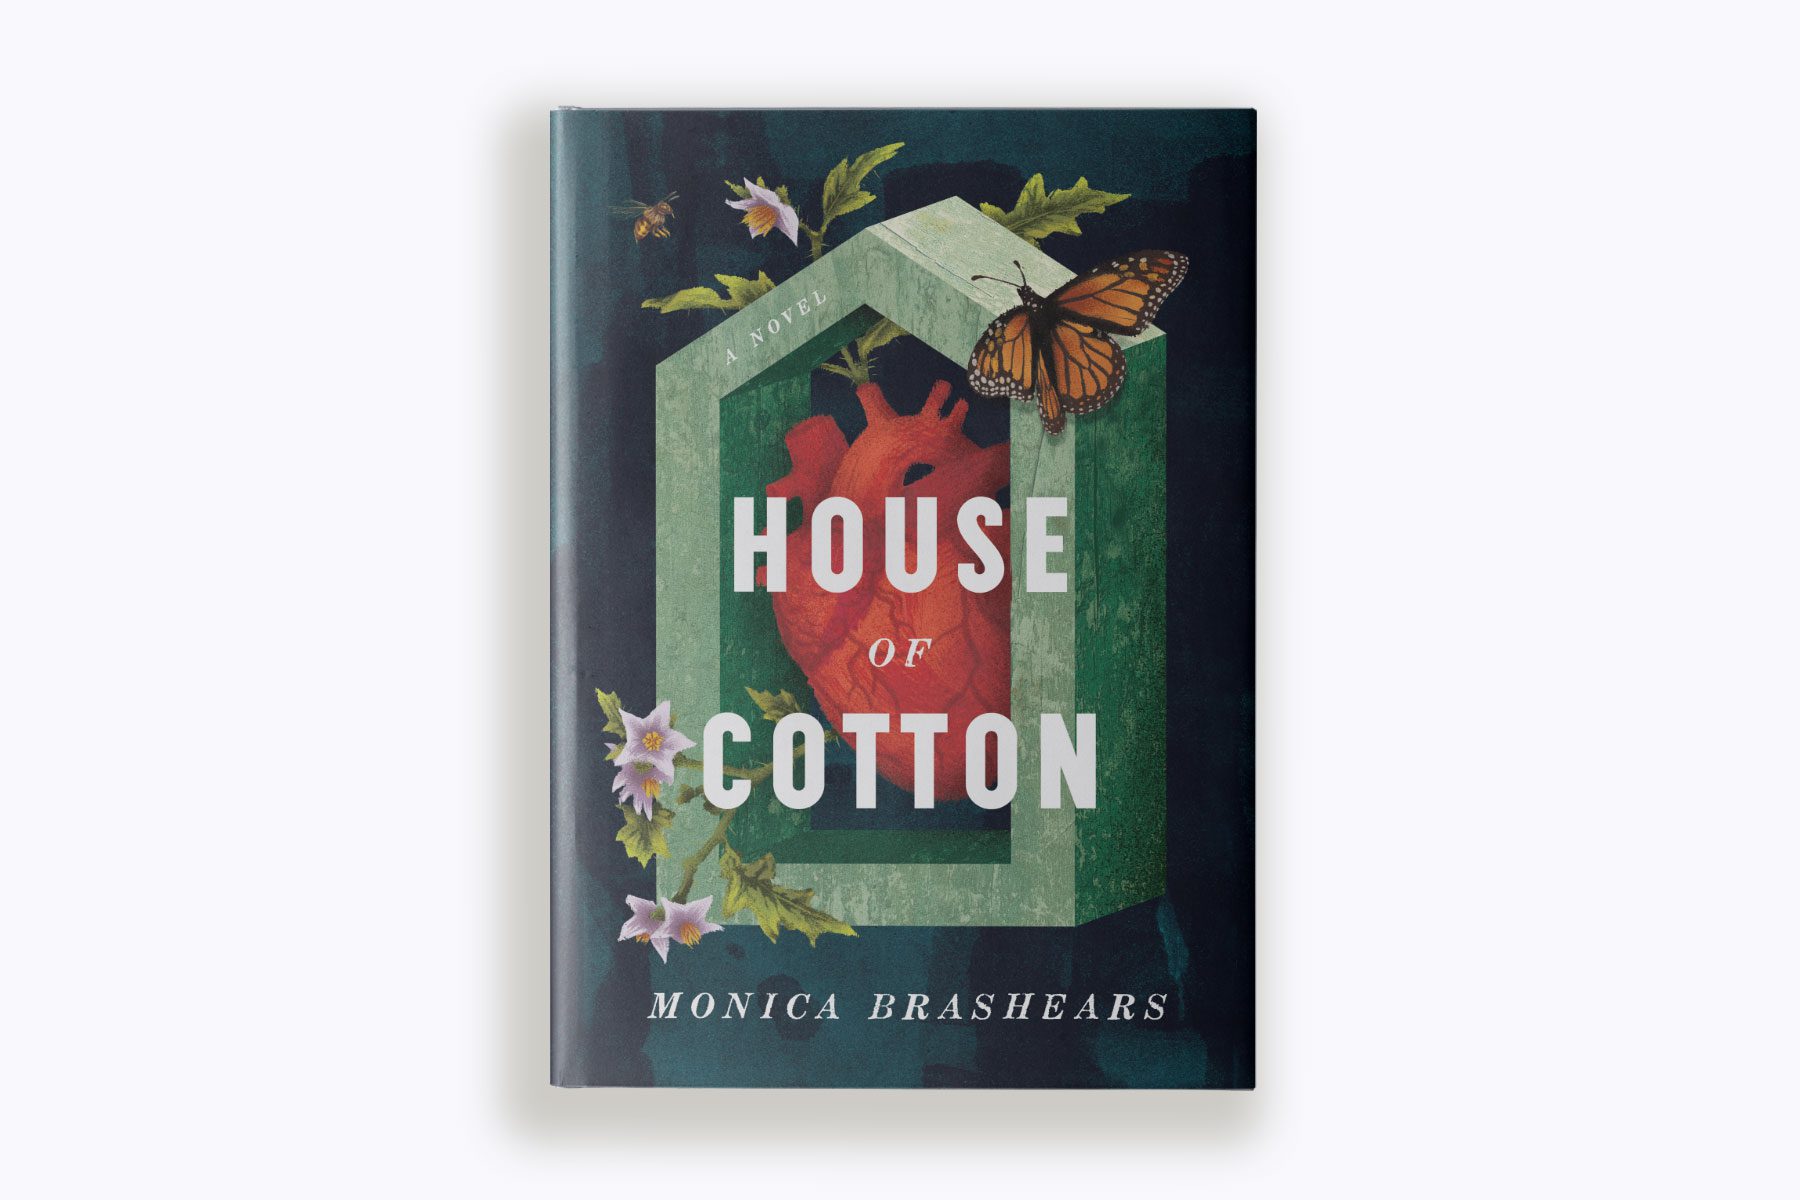 A photo illustration of "House of Cotton" book cover.